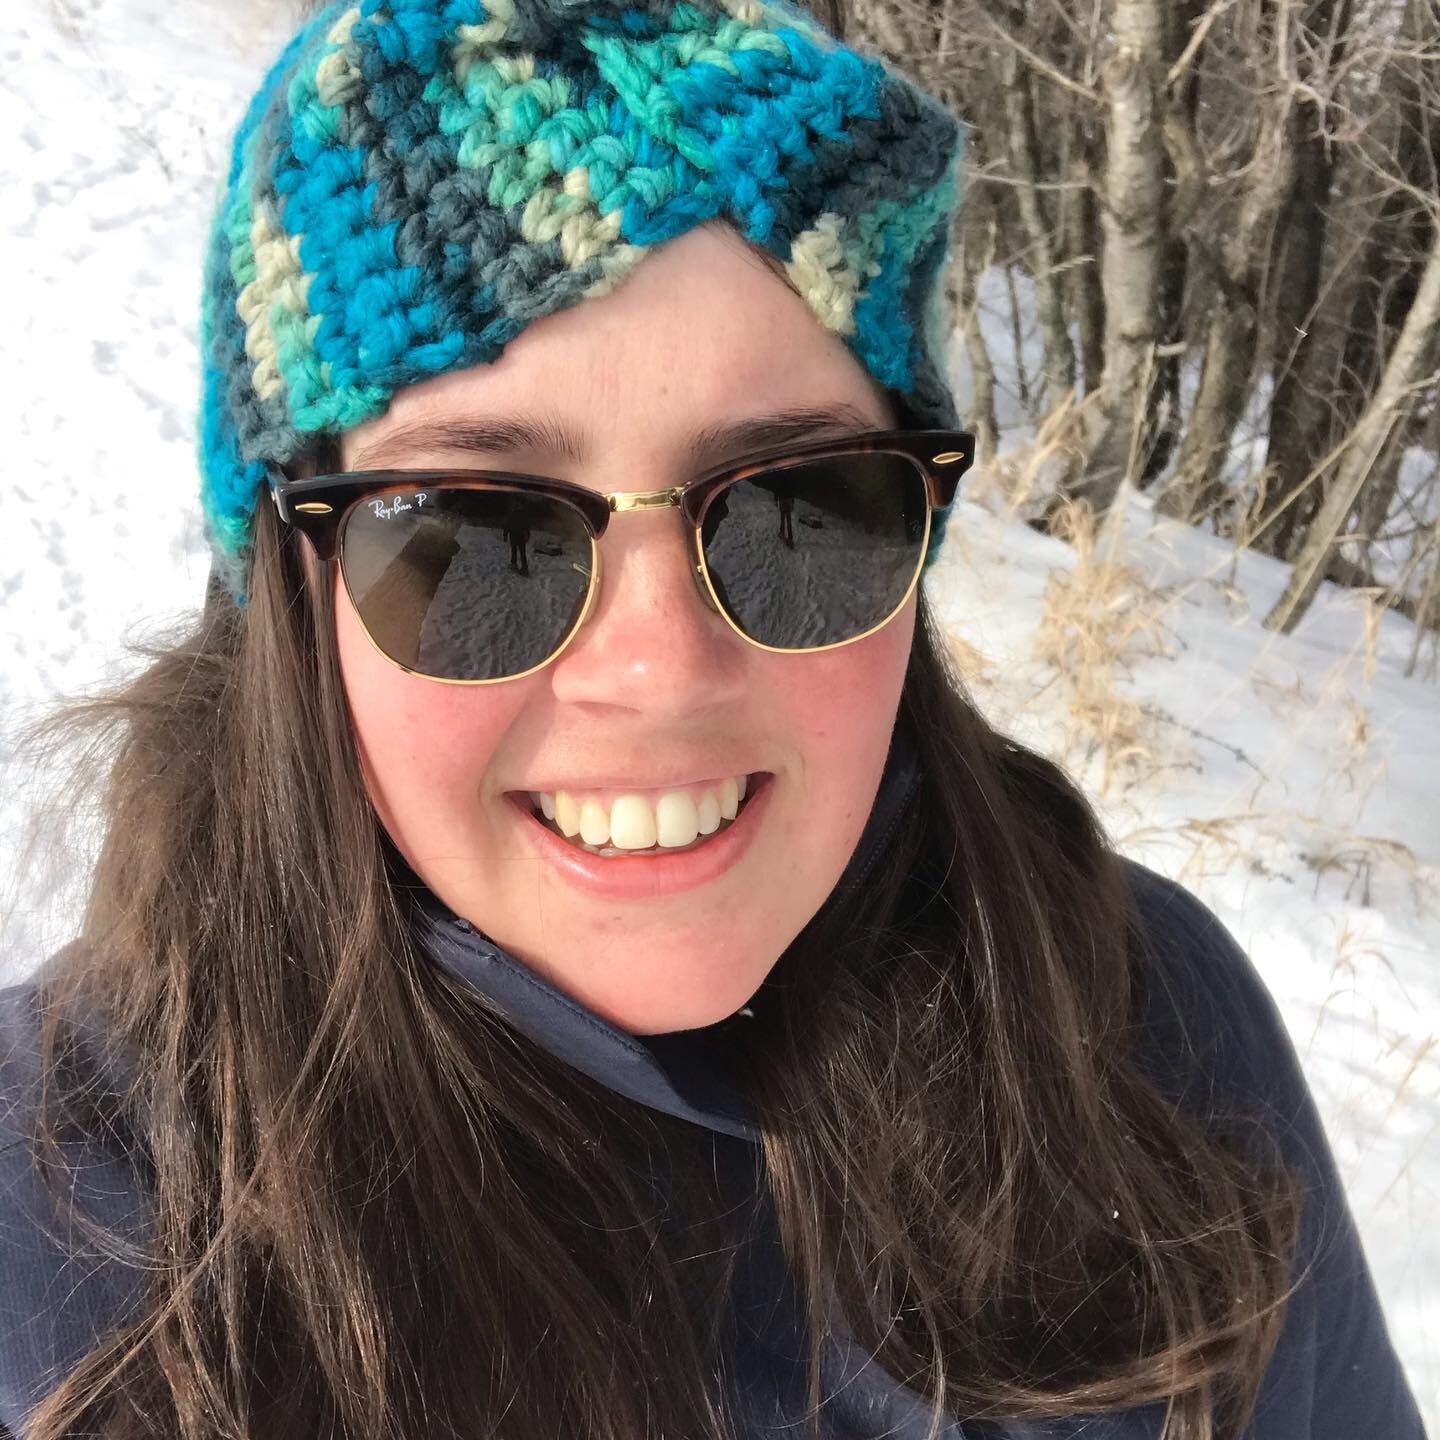 Happy Friday! 

I&rsquo;m pretty ready for winter to be over... 
but I do love wearing this headband by the lovely @123emmyabc 
.
.
.
#wintertime❄️ #snowshoeing #headbandstyle #winterweather #winterwalks #naturetime #winterwalk